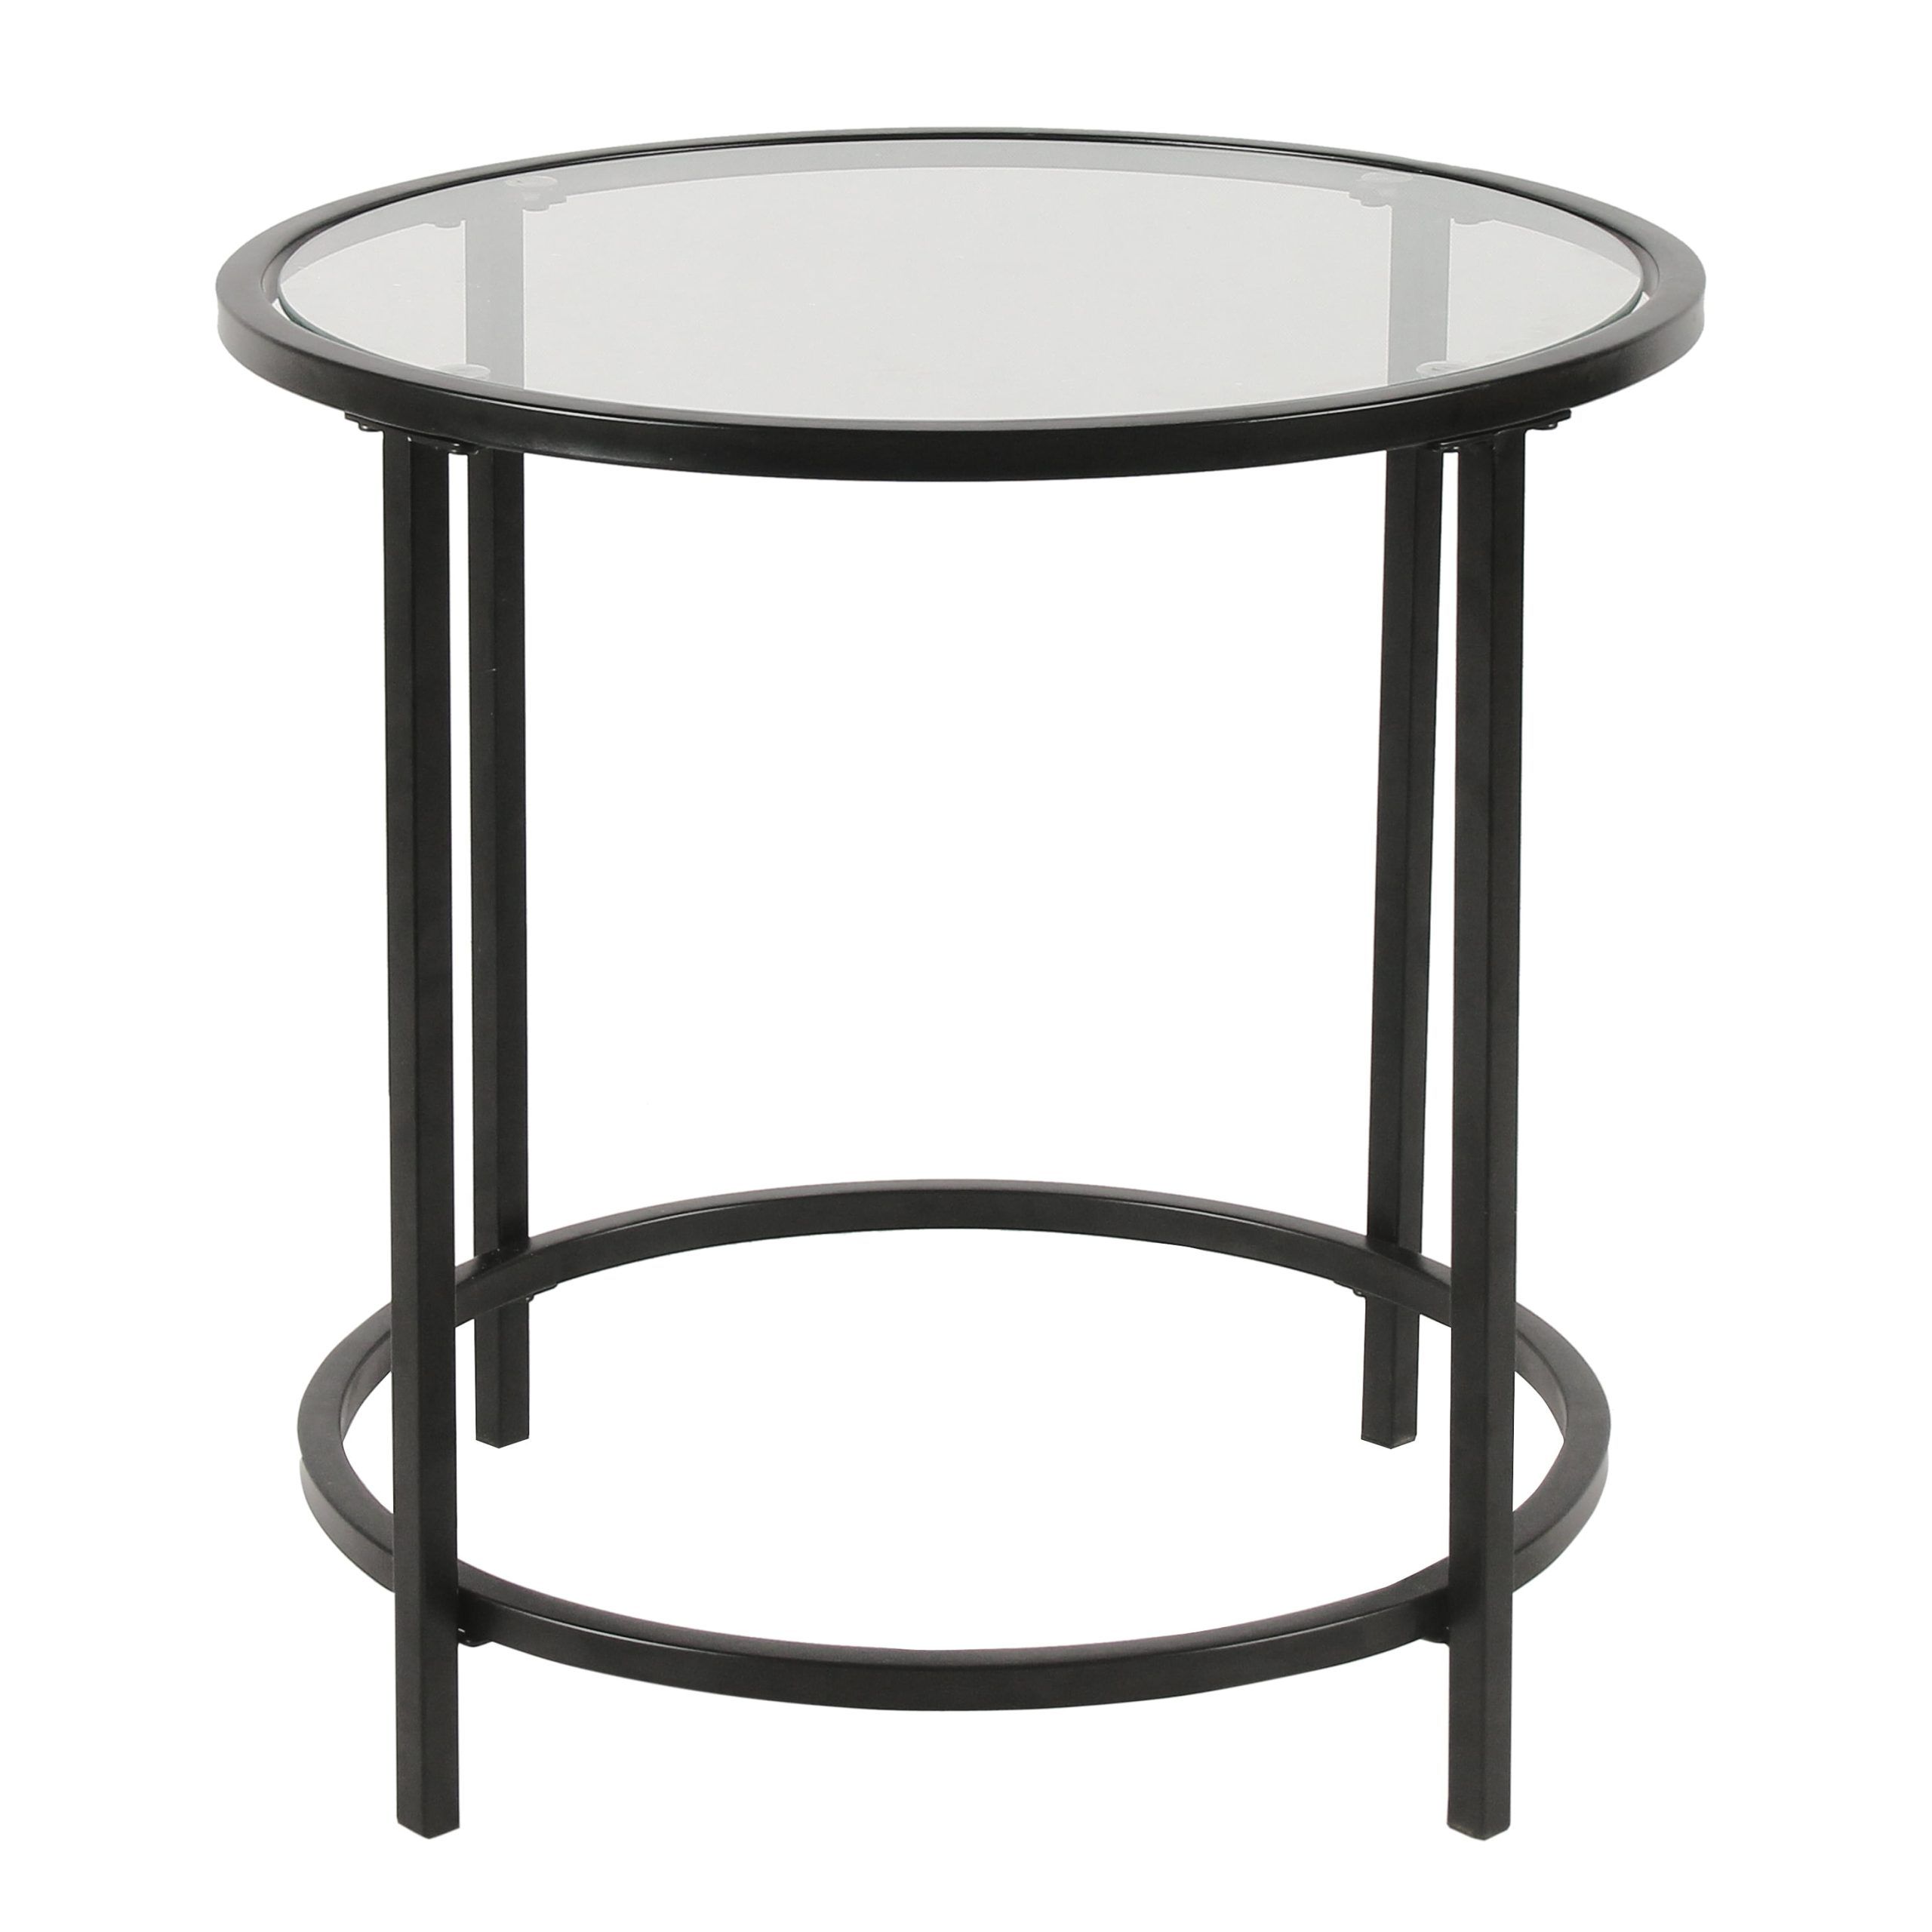 Homepop Round Metal Accent Table With Glass Top, Black – Walmart Throughout Metal Side Tables For Living Spaces (View 14 of 20)